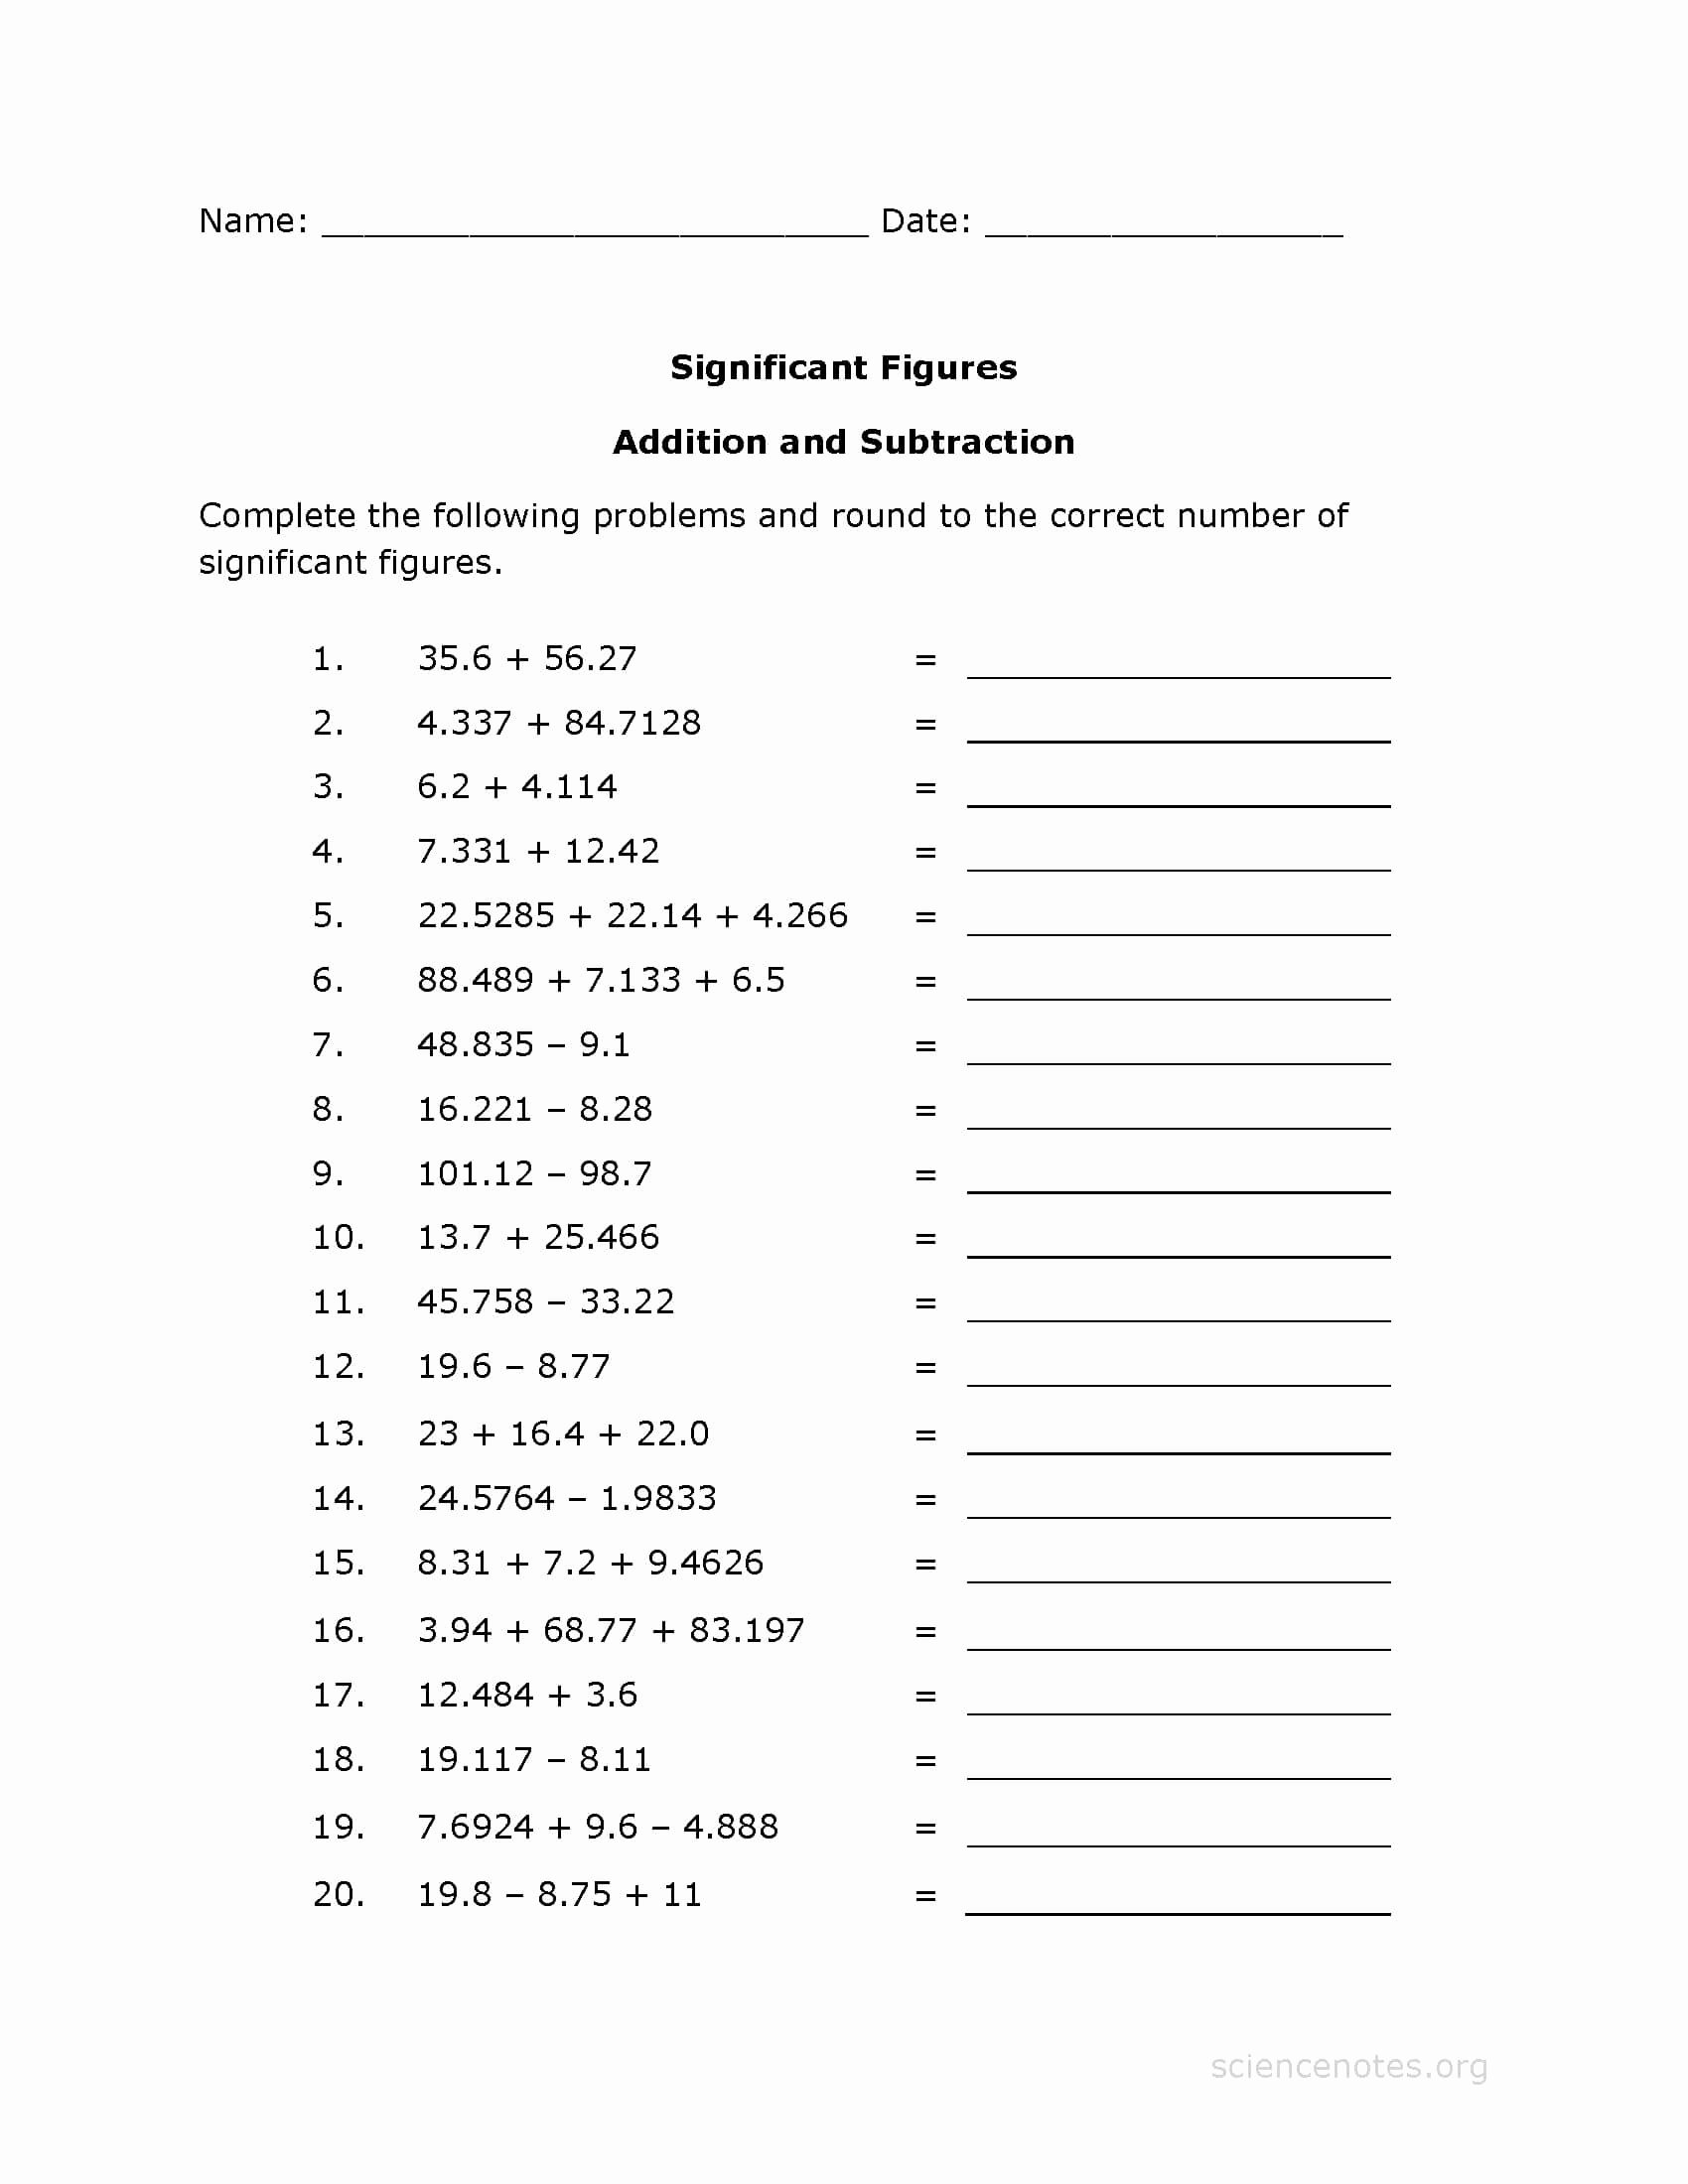 Sig Figs Worksheet with Answers Awesome Significant Figures Worksheet Pdf Addition Practice